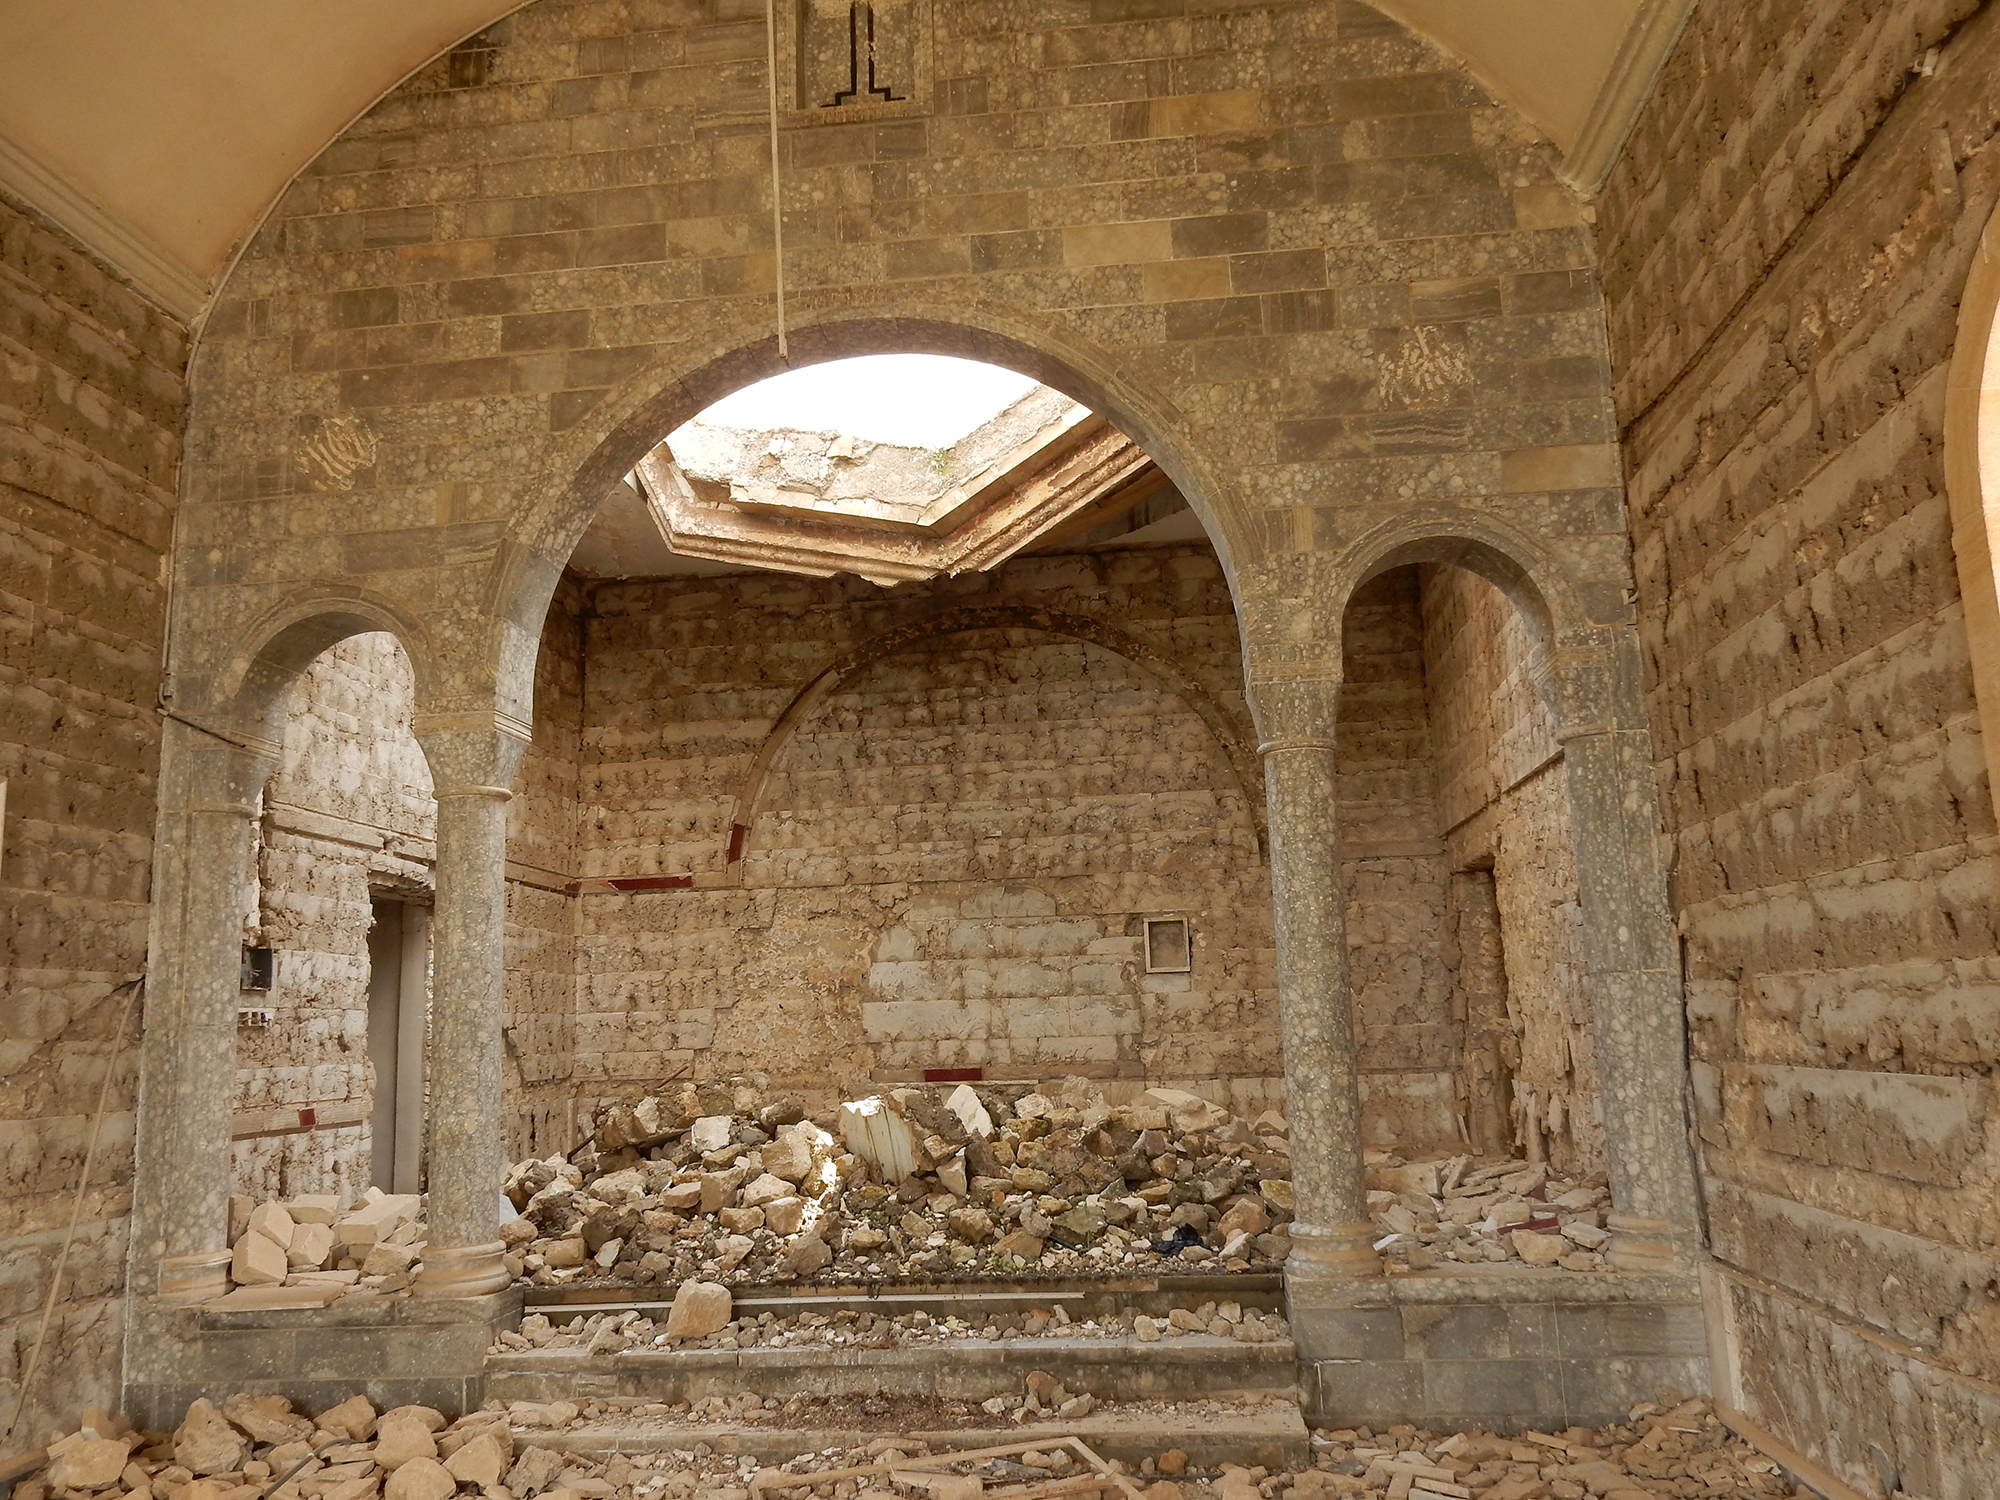 An ancient brick structure with a caved-in roof and rubble on the ground shot from outside an indoor archway.